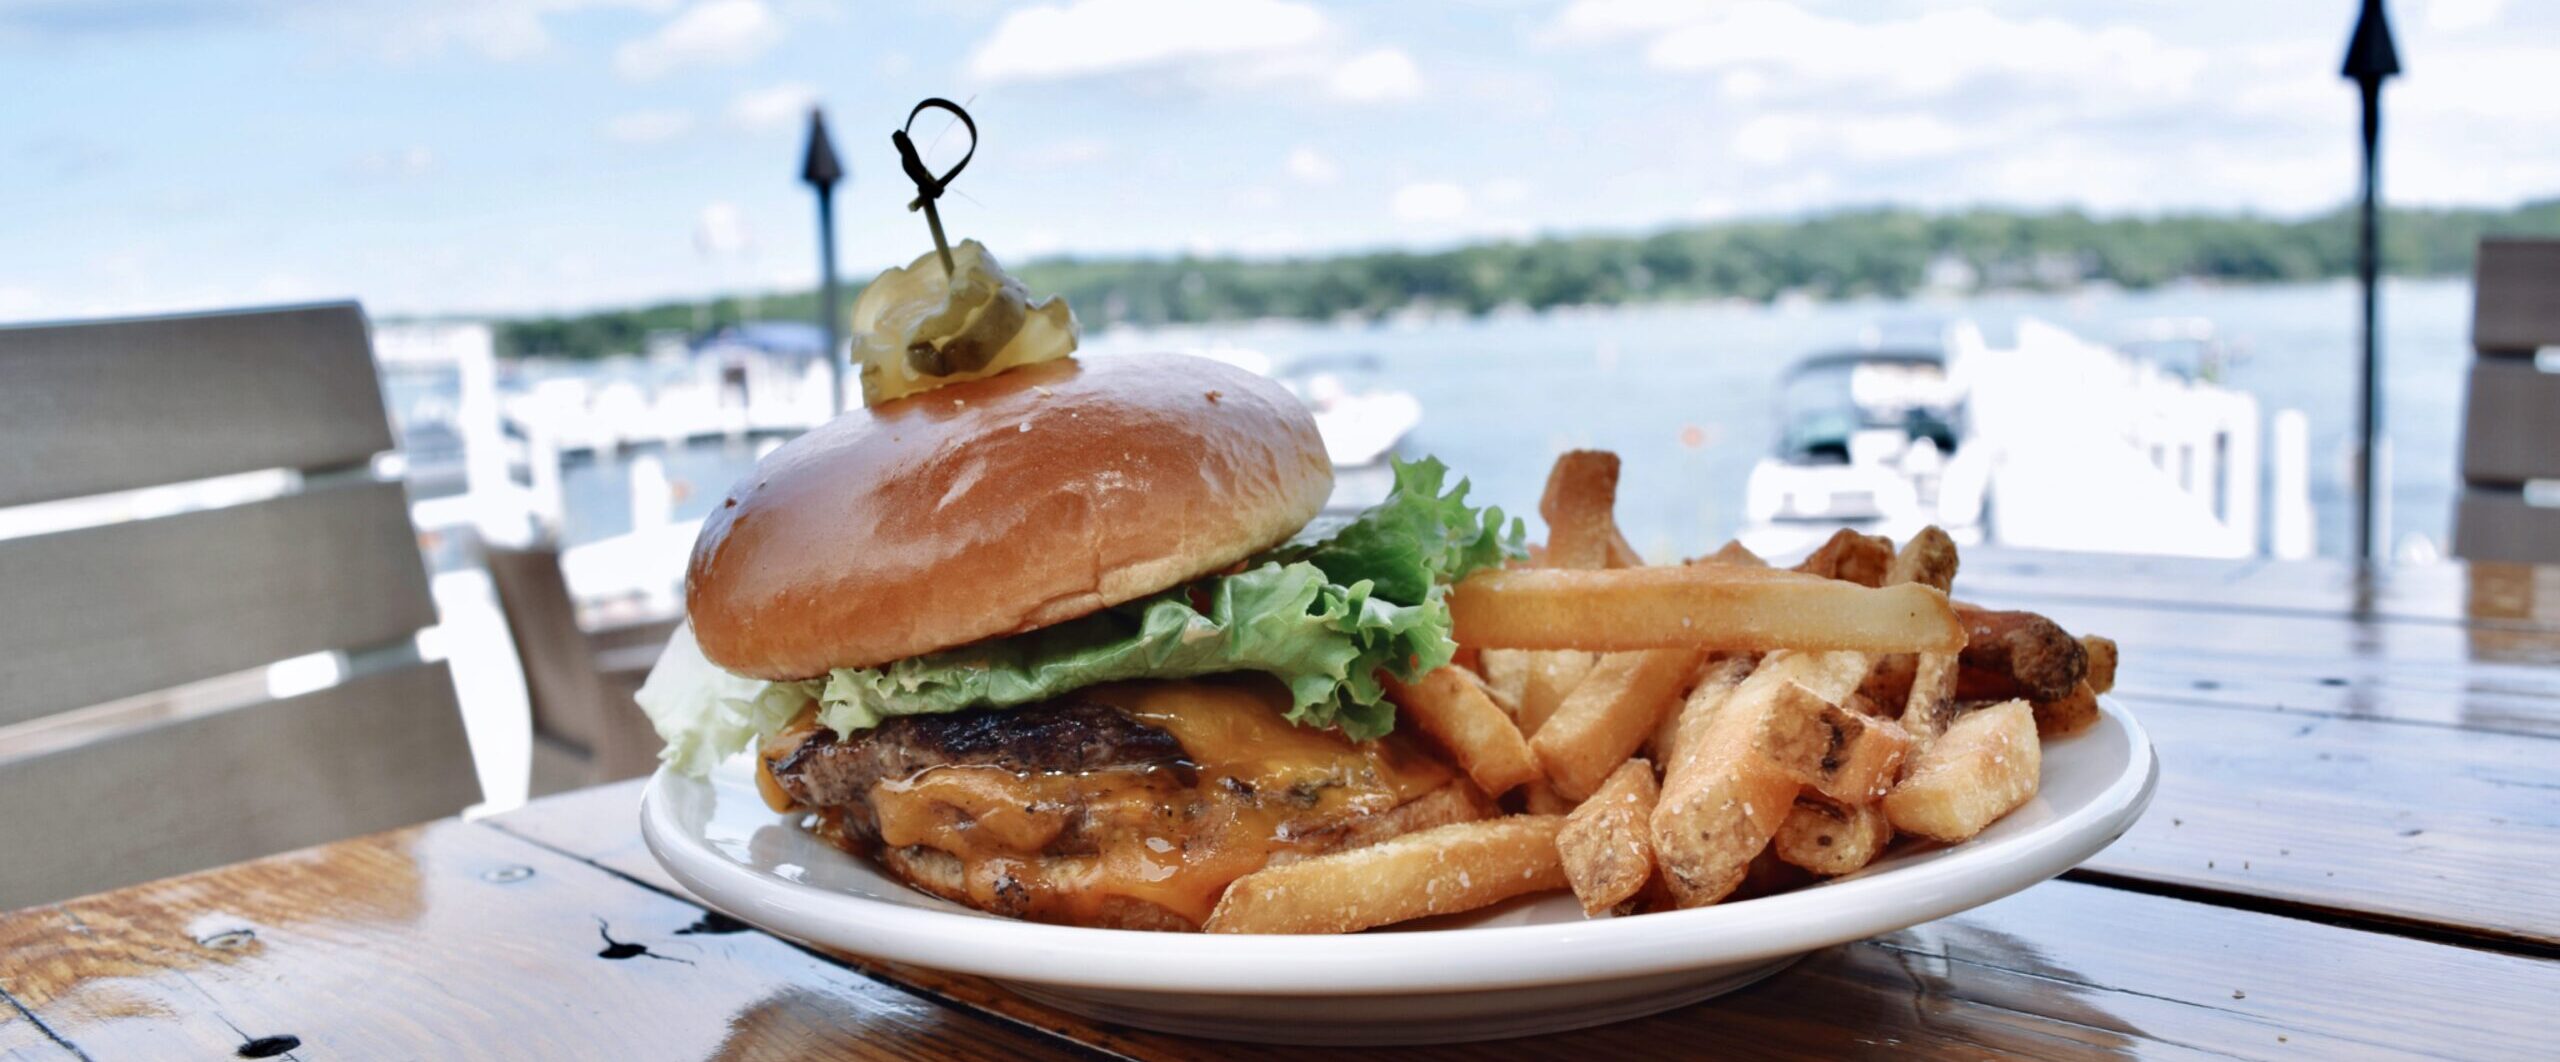 Burger on a table by the lake